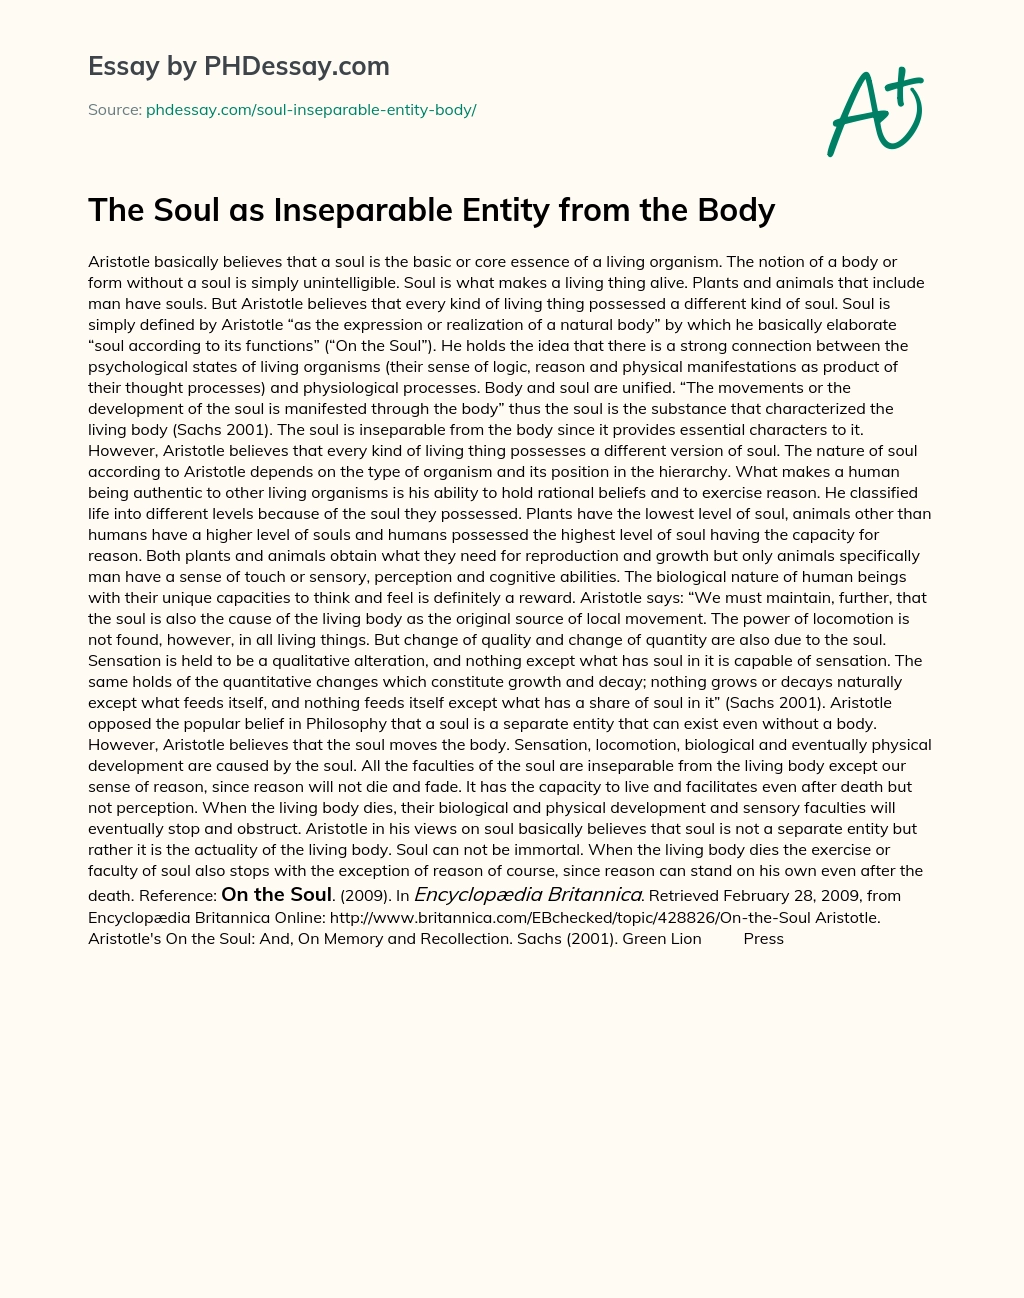 The Soul as Inseparable Entity from the Body essay